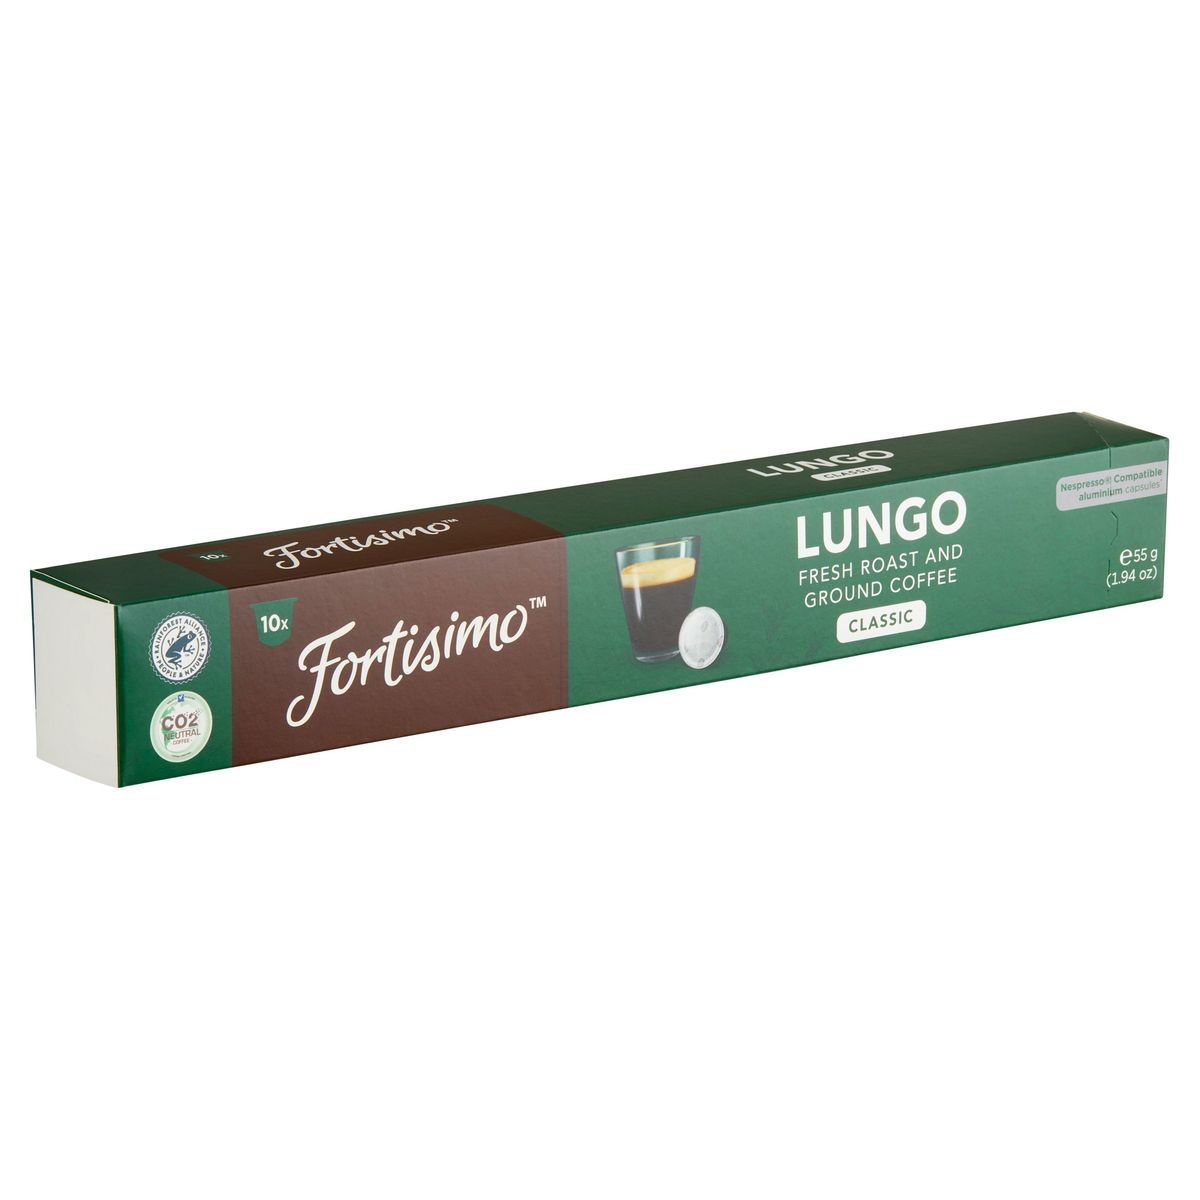 Fortisimo LUNGO FRESH ROAST AND GROUND COFFEE CLASSIC 10 x 5.5 g capsules 55 g